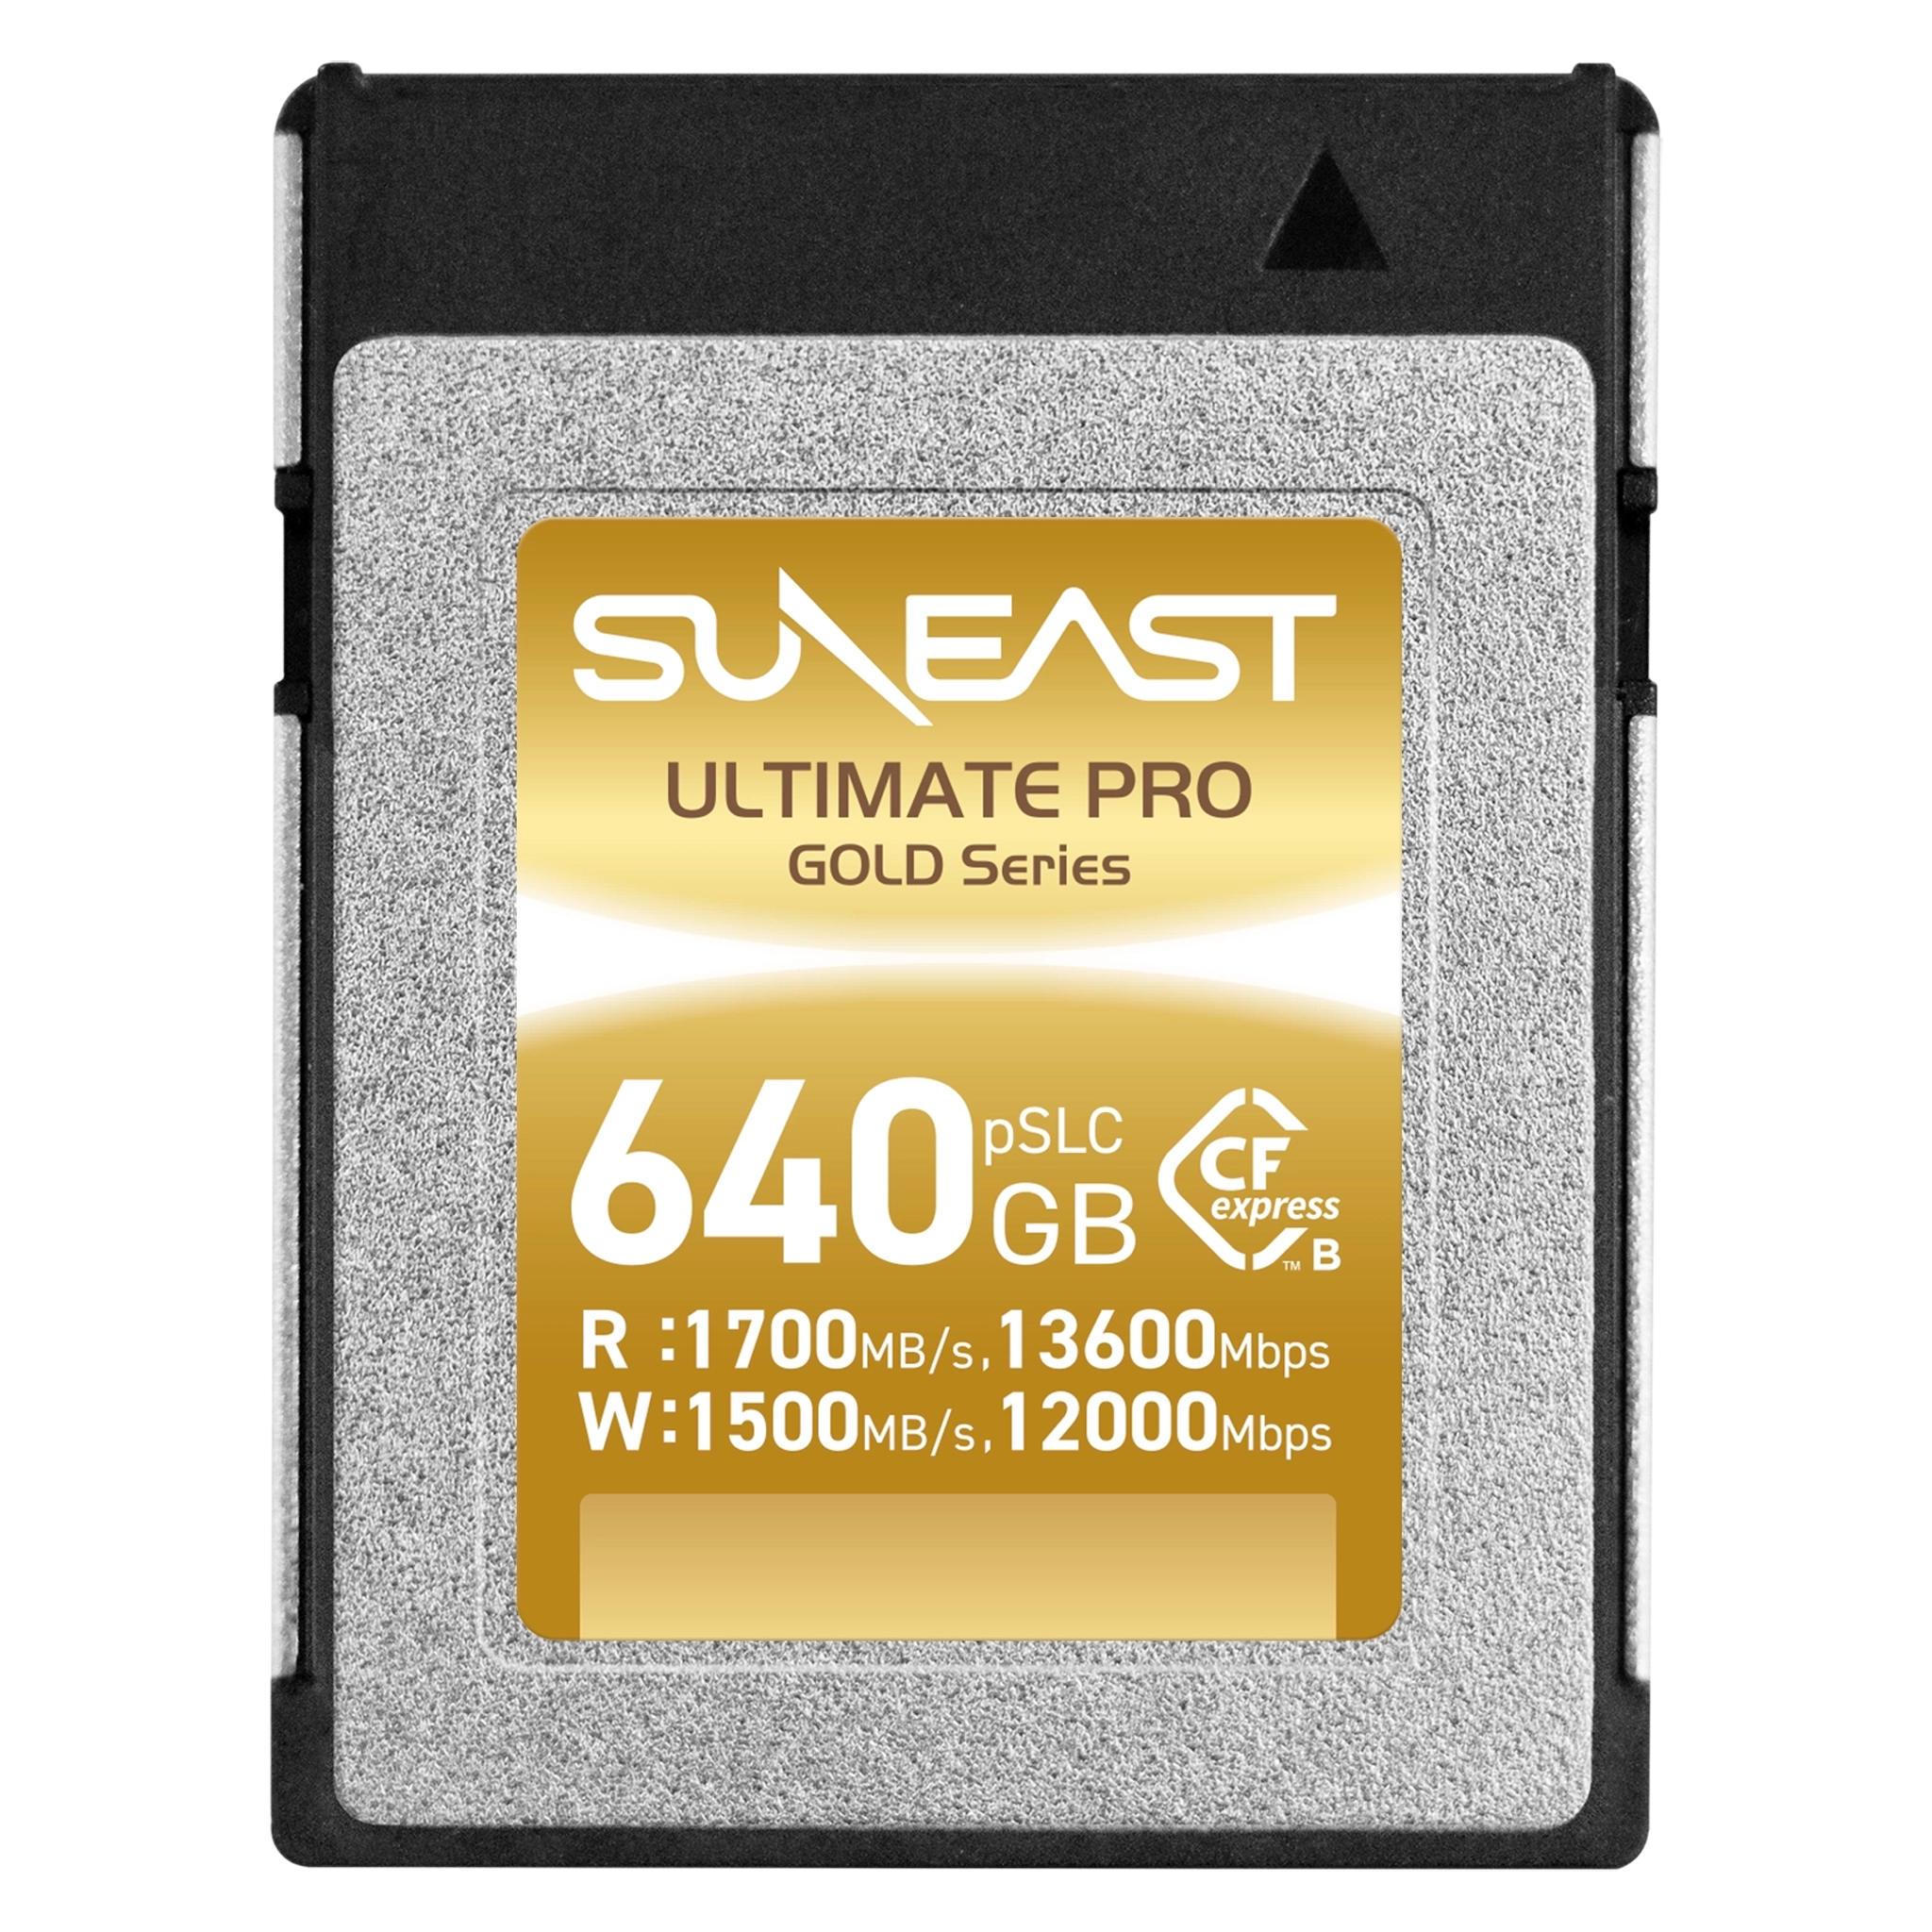 ULTIMATE PRO CFexpress Type B Card【GOLD Series】640GB - SUNEAST online store